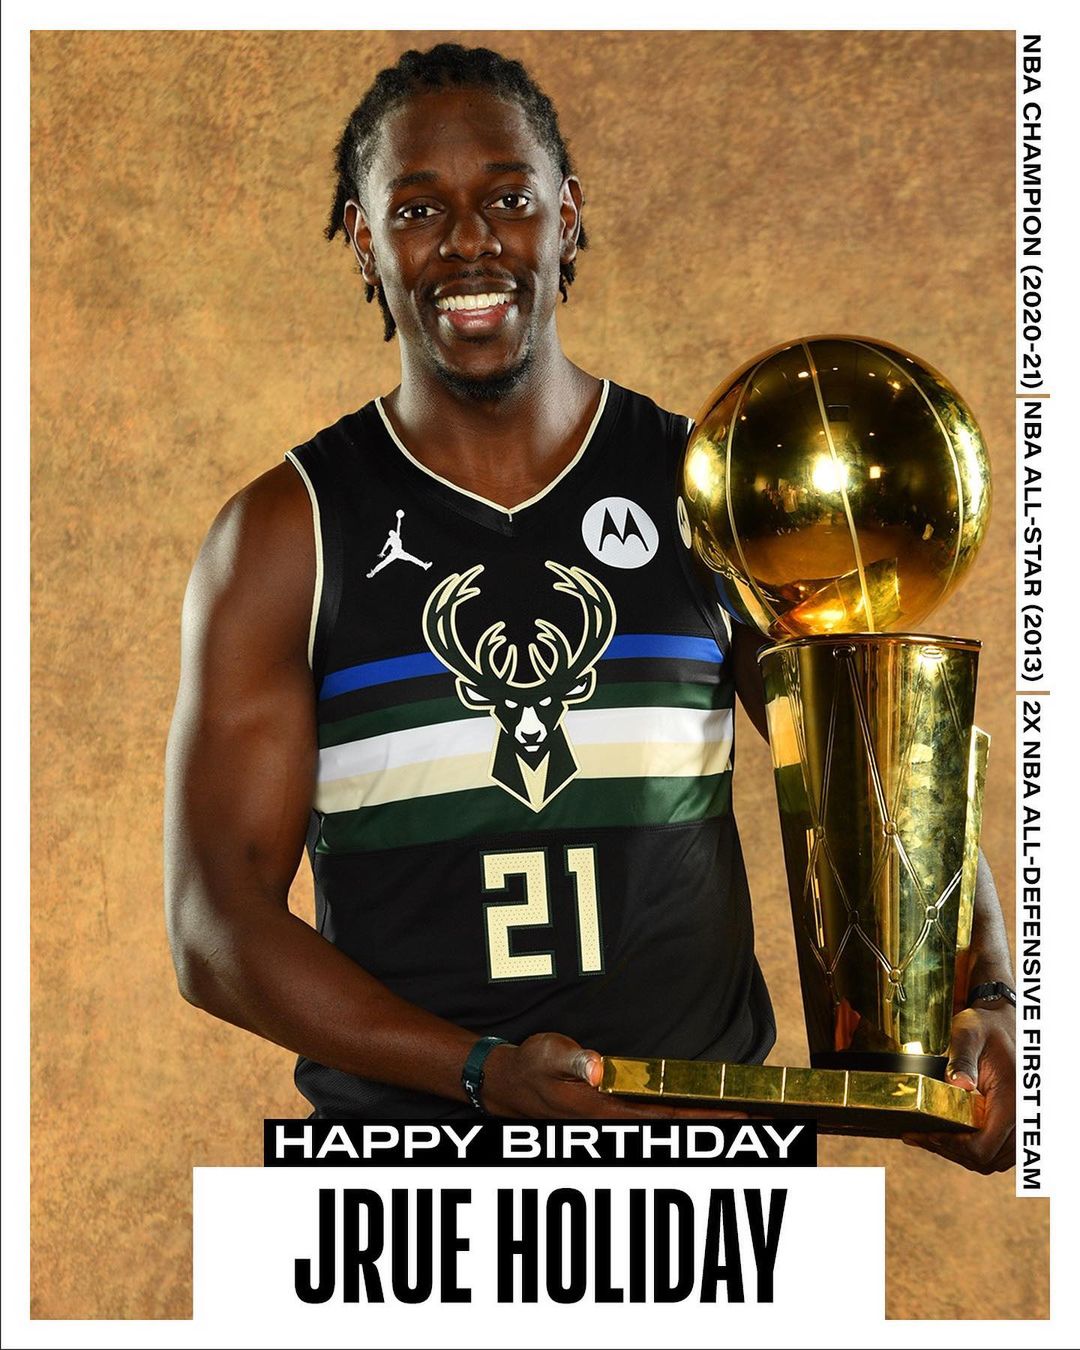 Join us in wishing @jrue_holiday11 of the @bucks a HAPPY 32nd BIRTHDAY! #NBABDAY...